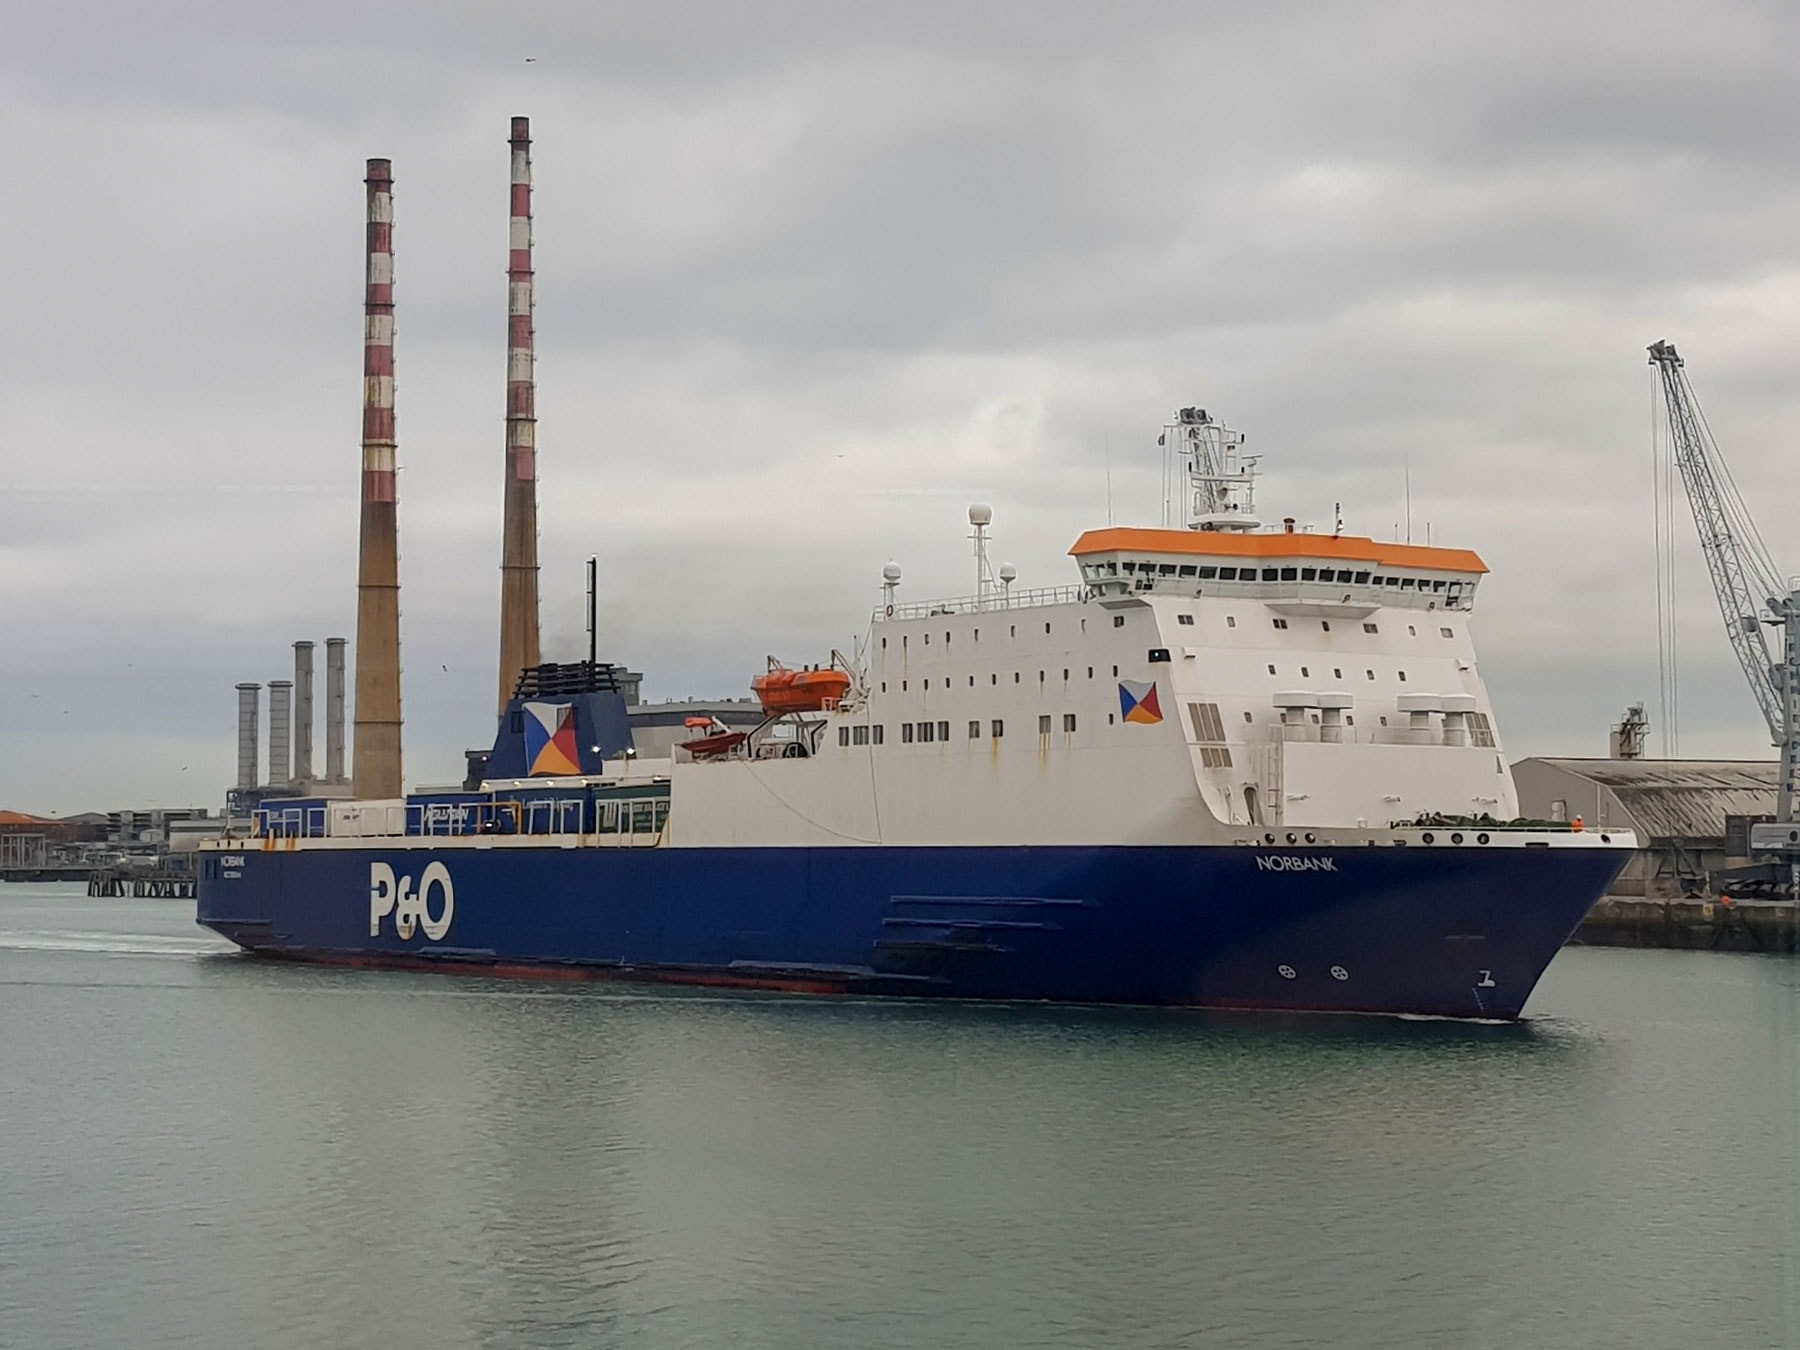 P&O Ferries NORBANK seen arriving in Dublin at the end of September 2018. Copyright © Robbie Cox.